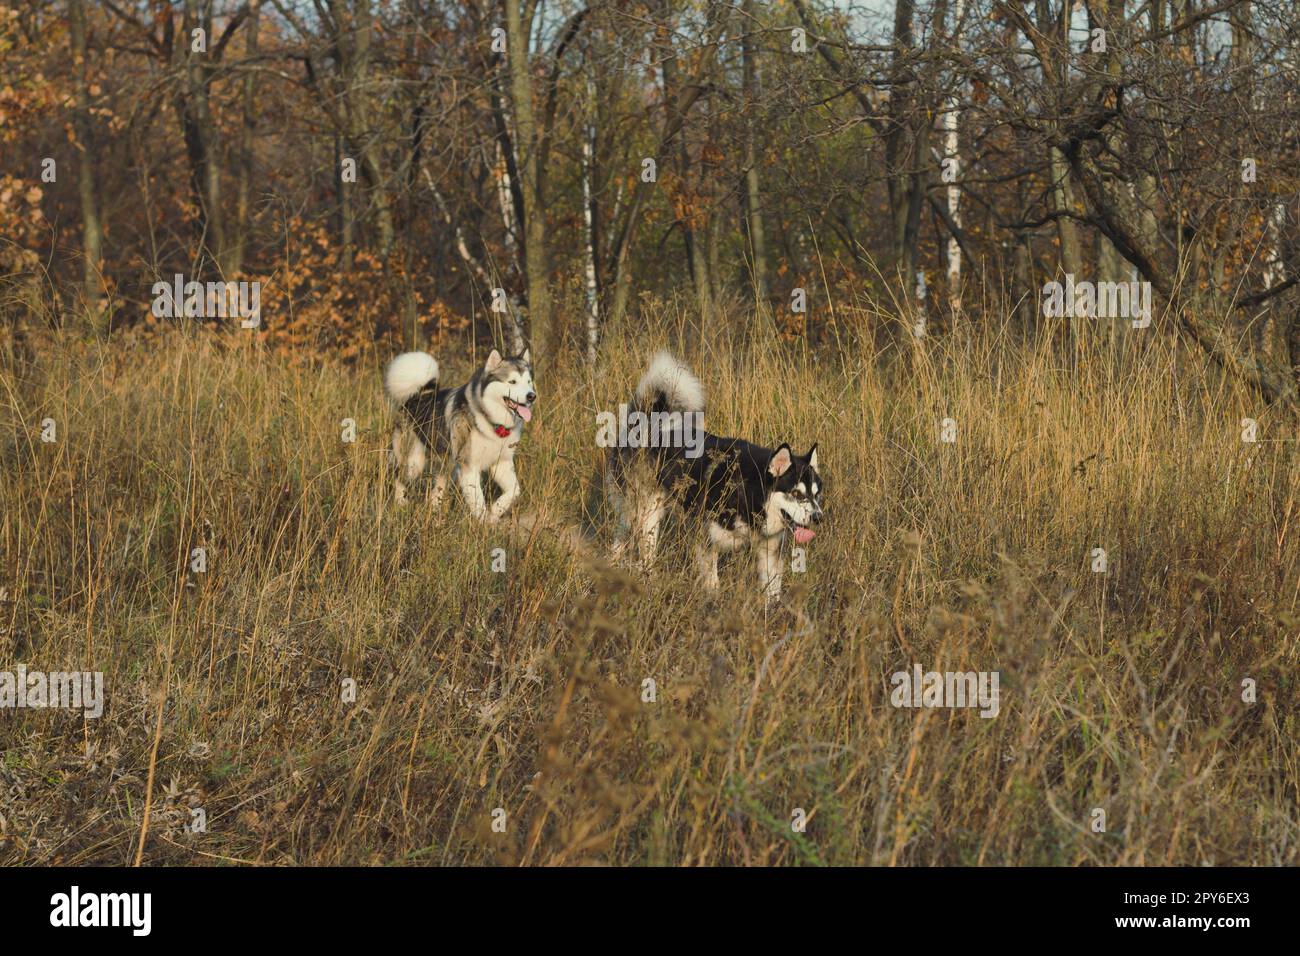 Siberian huskies walking through high dry grass scenic photography. Picture of dogs with woodland on background. High quality wallpaper. Photo concept Stock Photo